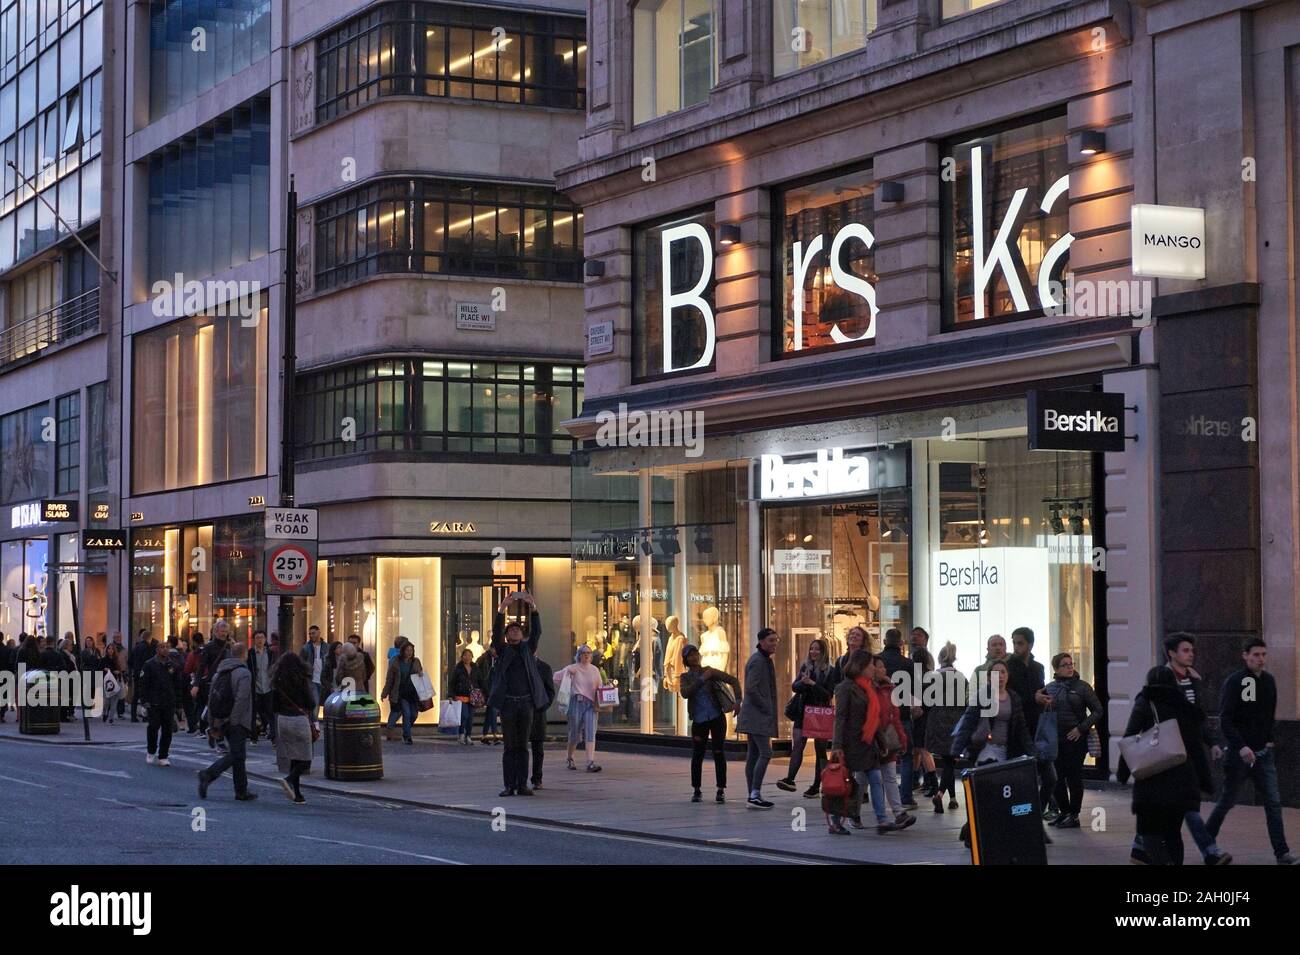 LONDON, UK - APRIL 23, 2016: People shop at Bershka and Zara, Oxford Street  in London. Oxford Street has approximately half a million daily visitors a  Stock Photo - Alamy